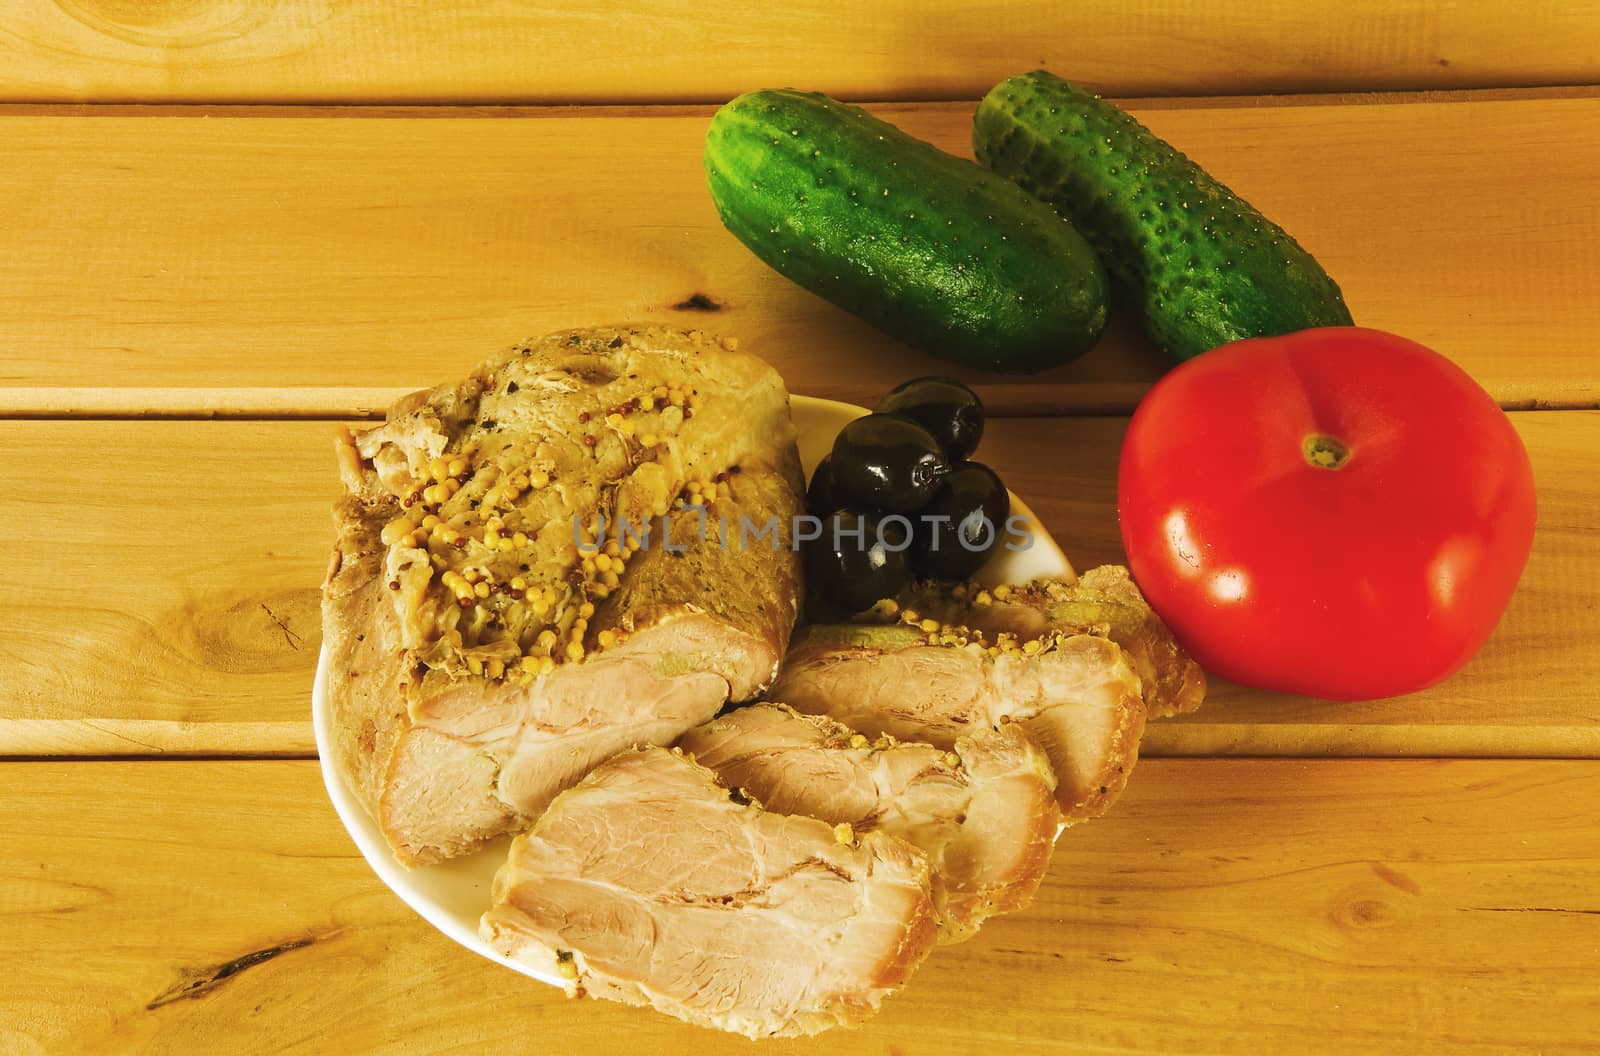 Baked ham on a plate on a wooden surface